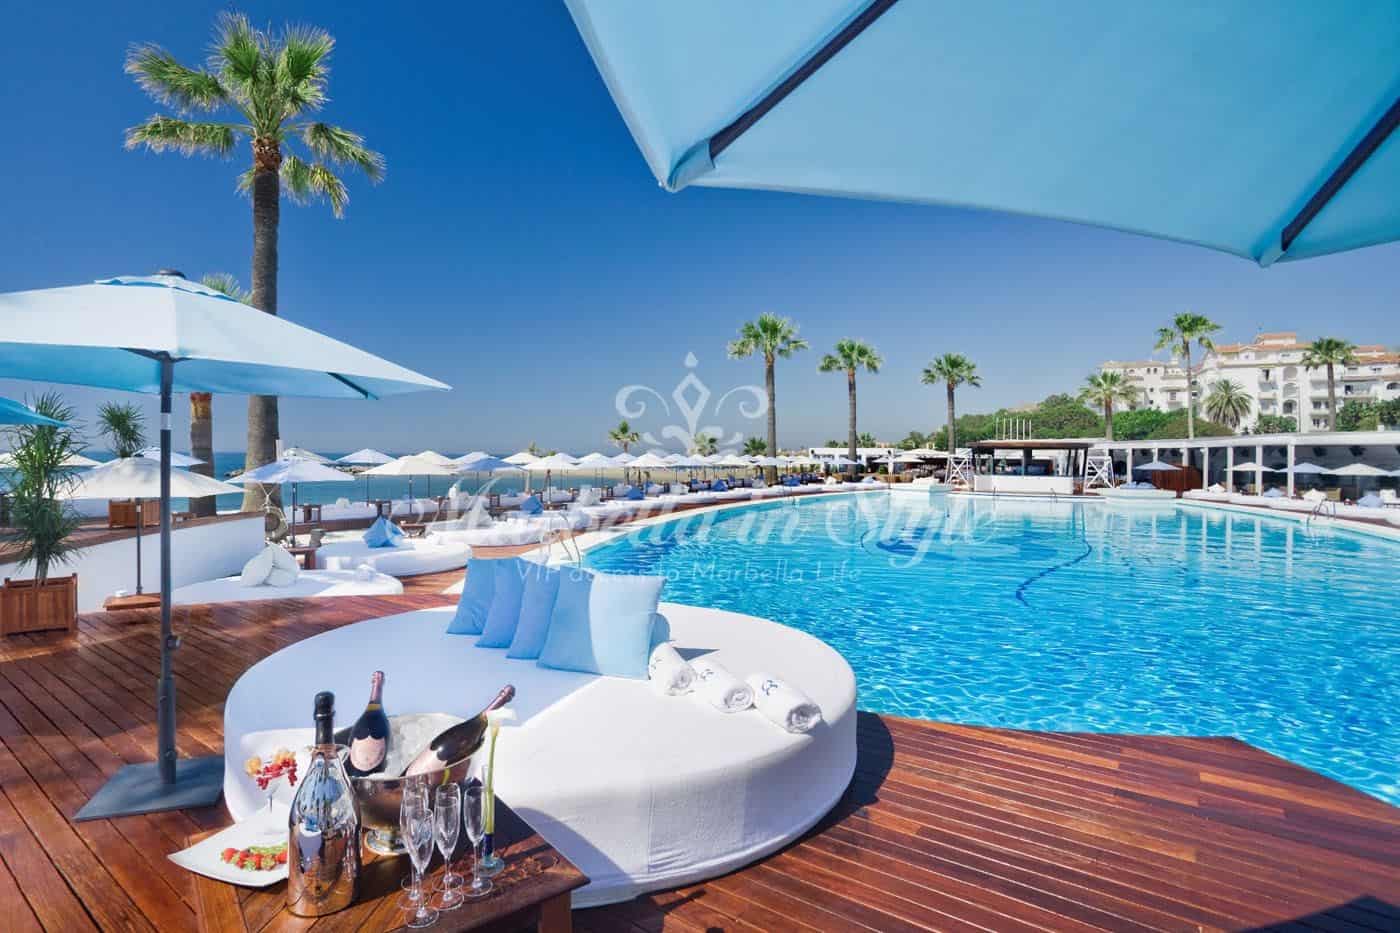 Our Guide: Marbella Hot Spots 2022 - Marbella in Style